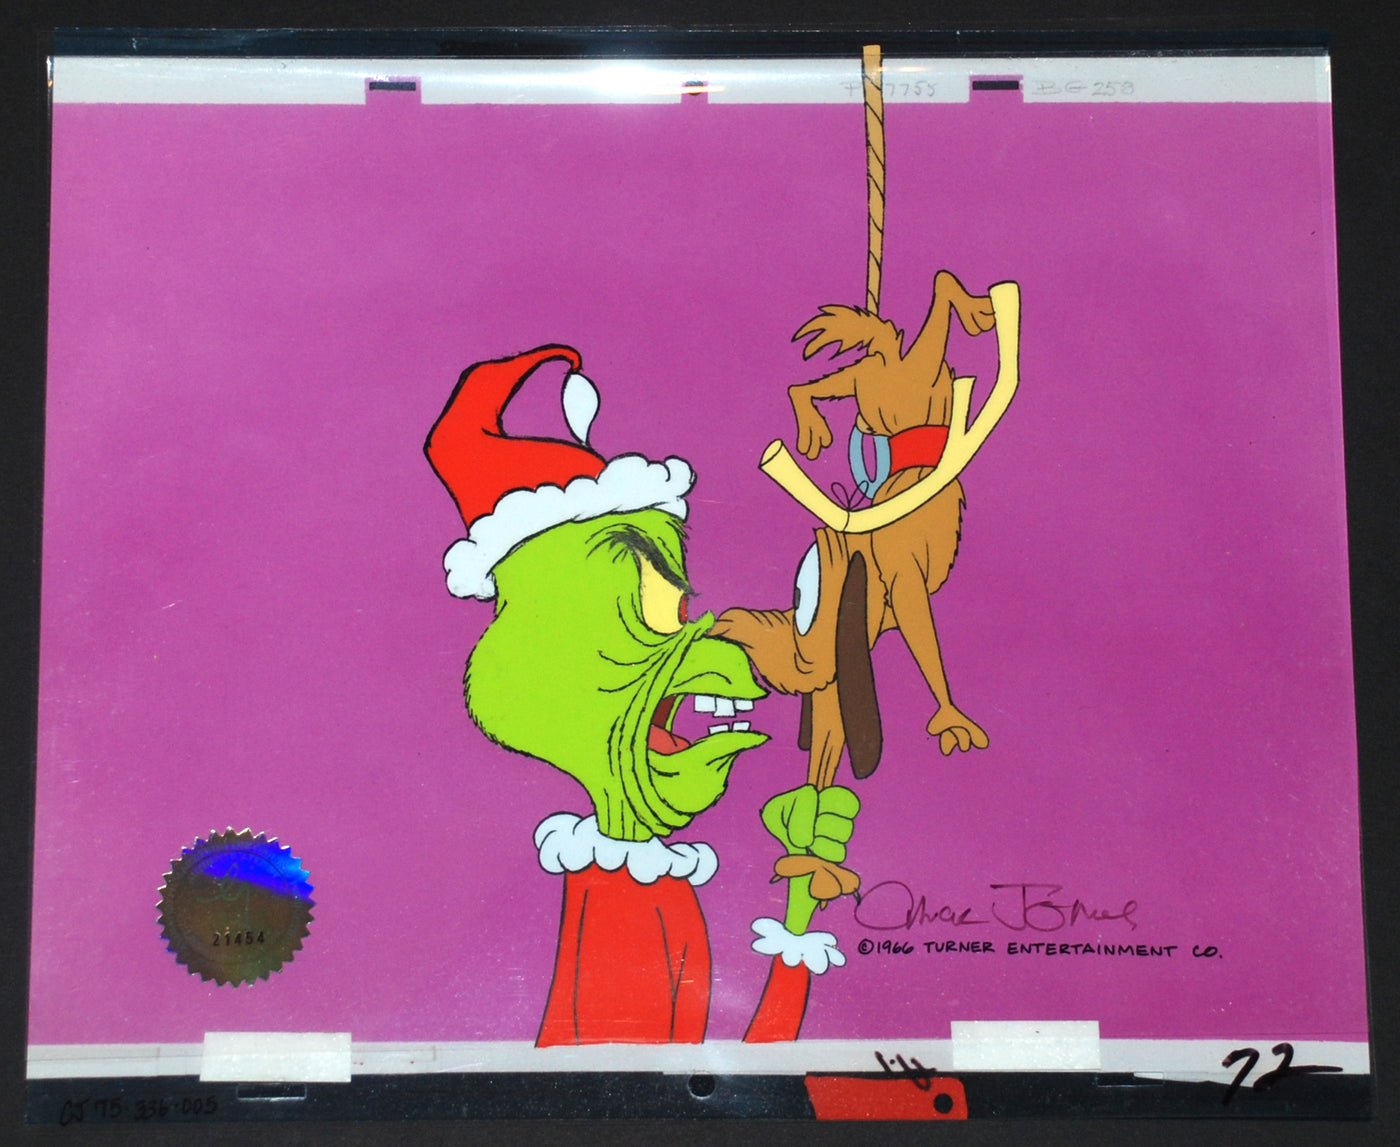 Original Signed Chuck Jones Production Cels of Max and The Grinch from How the Grinch Stole Christmas